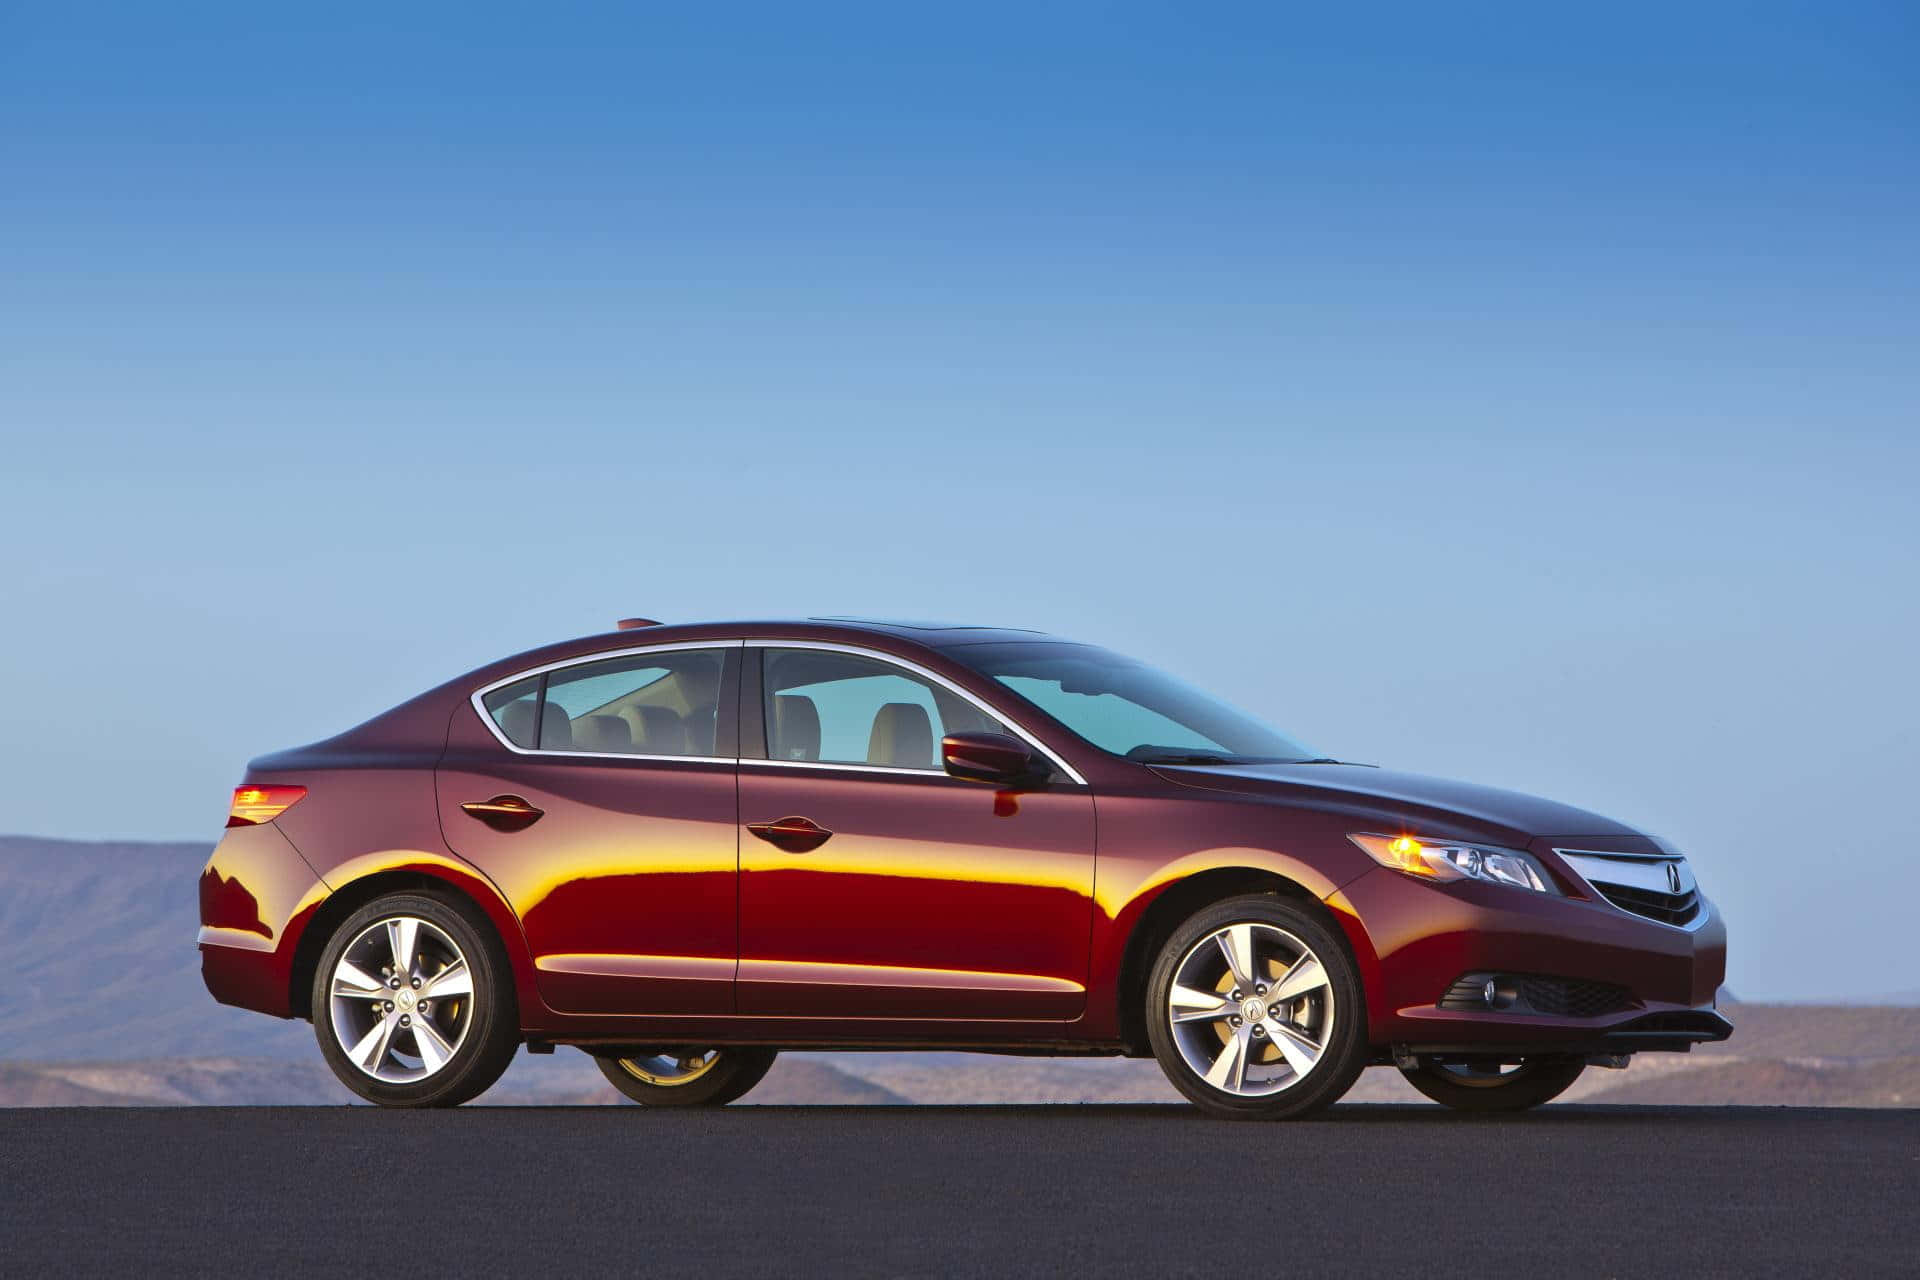 Stunning Acura ILX on the Road Wallpaper